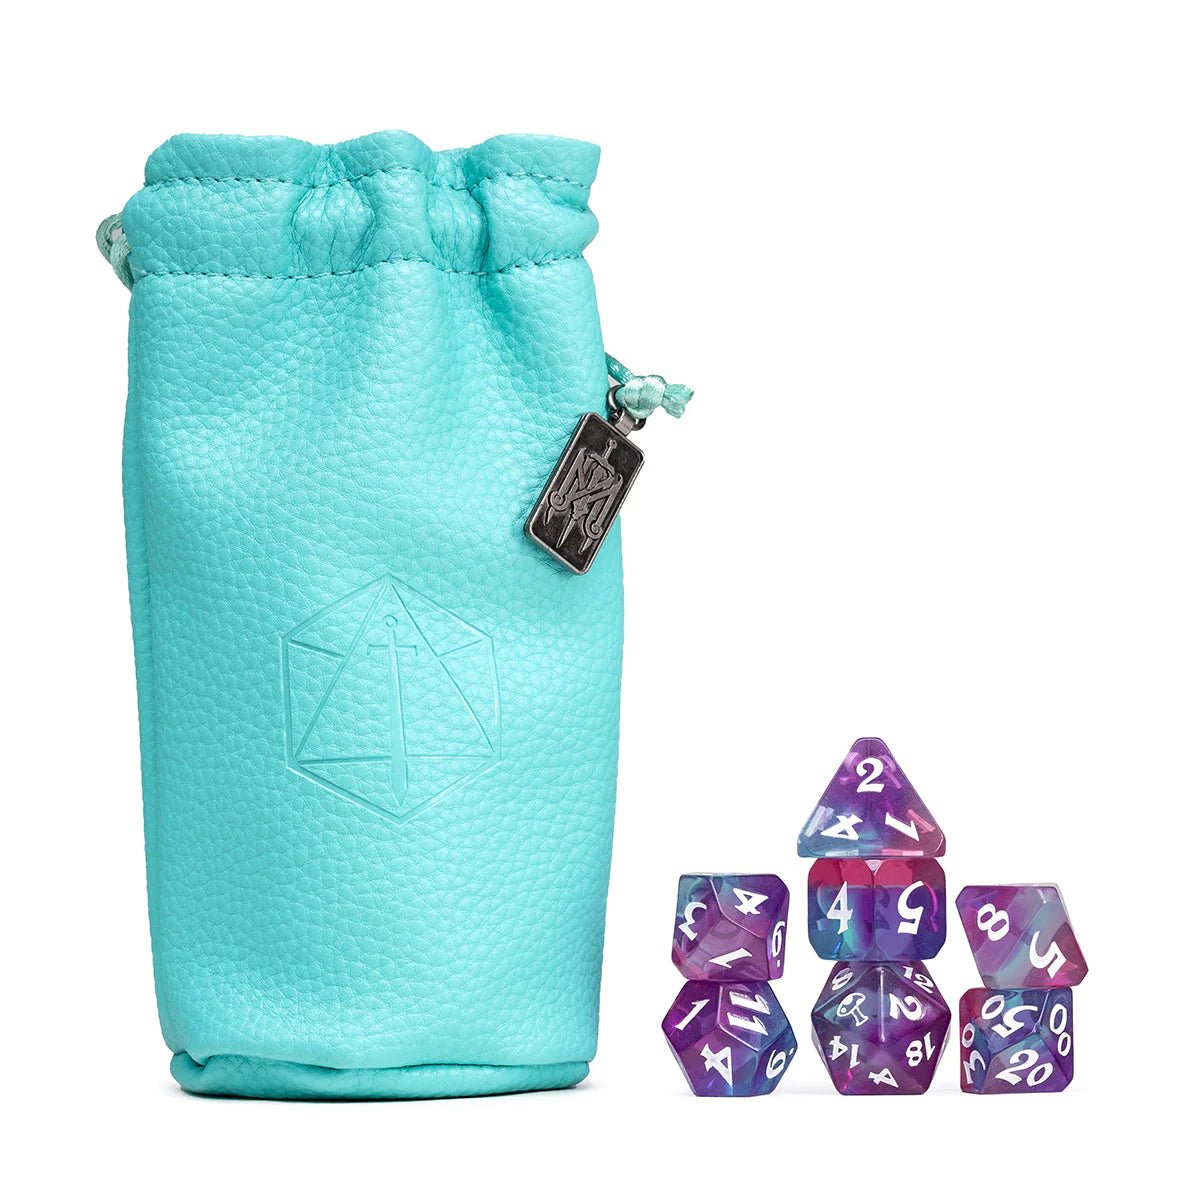 Mighty Nein Dice Set: Caduceus Clay (Light Teal/Multicolor) - The Fourth Place